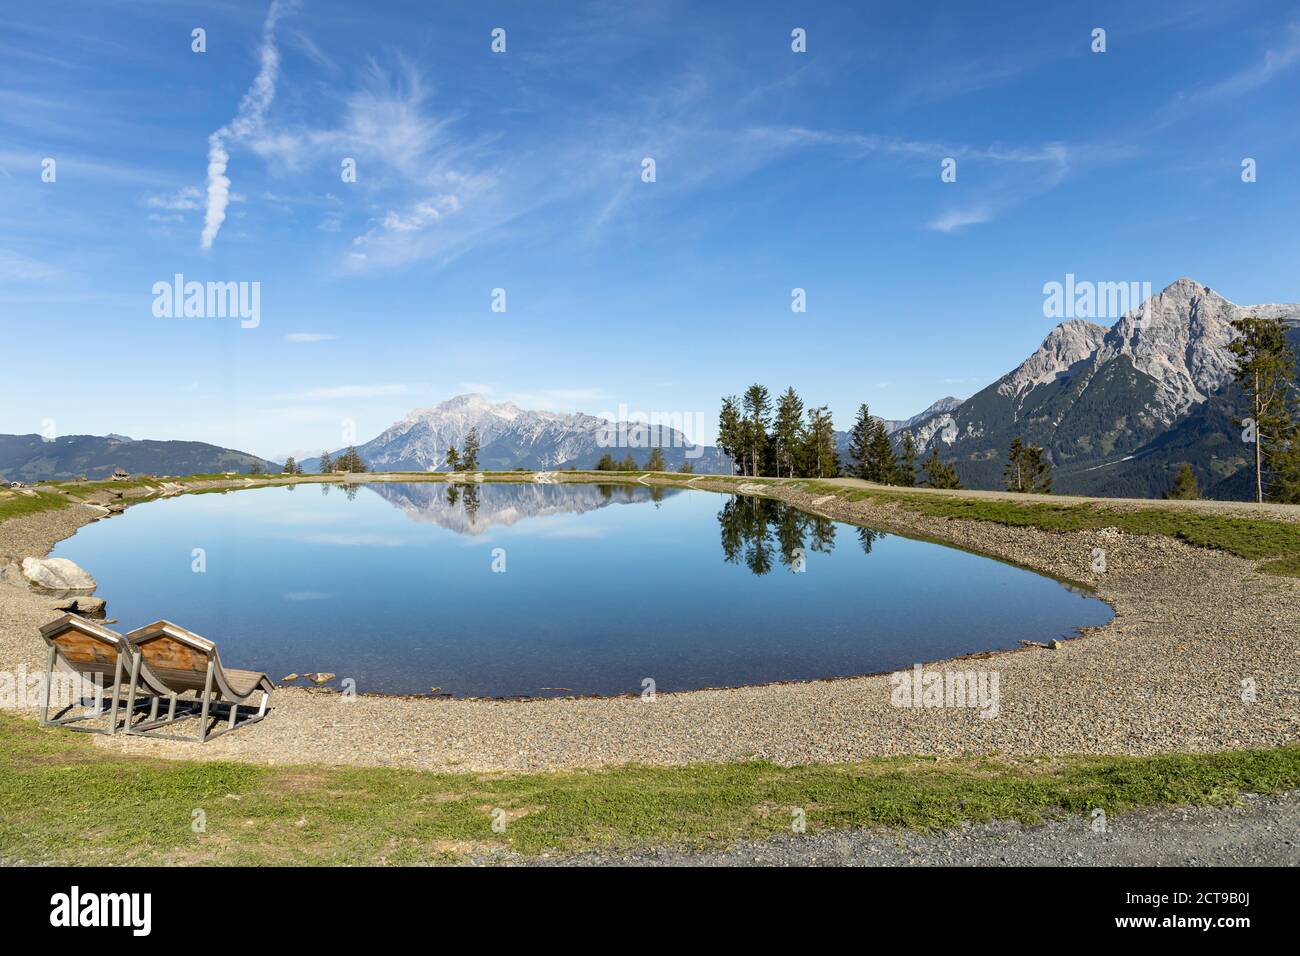 Prinzensee lake in Austria in the region of Hochkoenig Salzburg. The mountains in the background reflect in the mirro surface of the lake. A car is pa Stock Photo